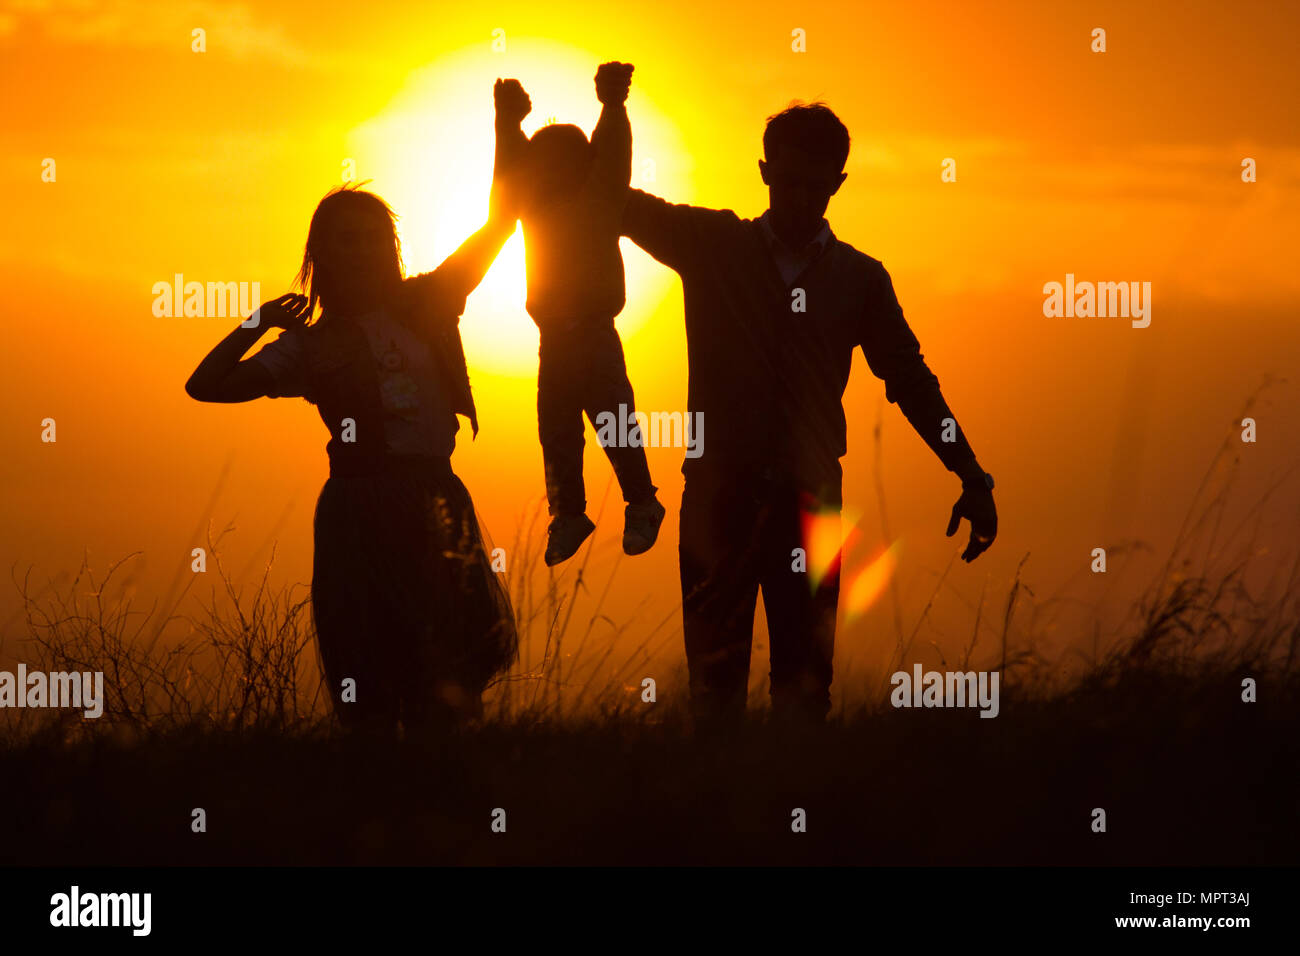 Silhouettes of a family of 3, who hold hands Stock Photo